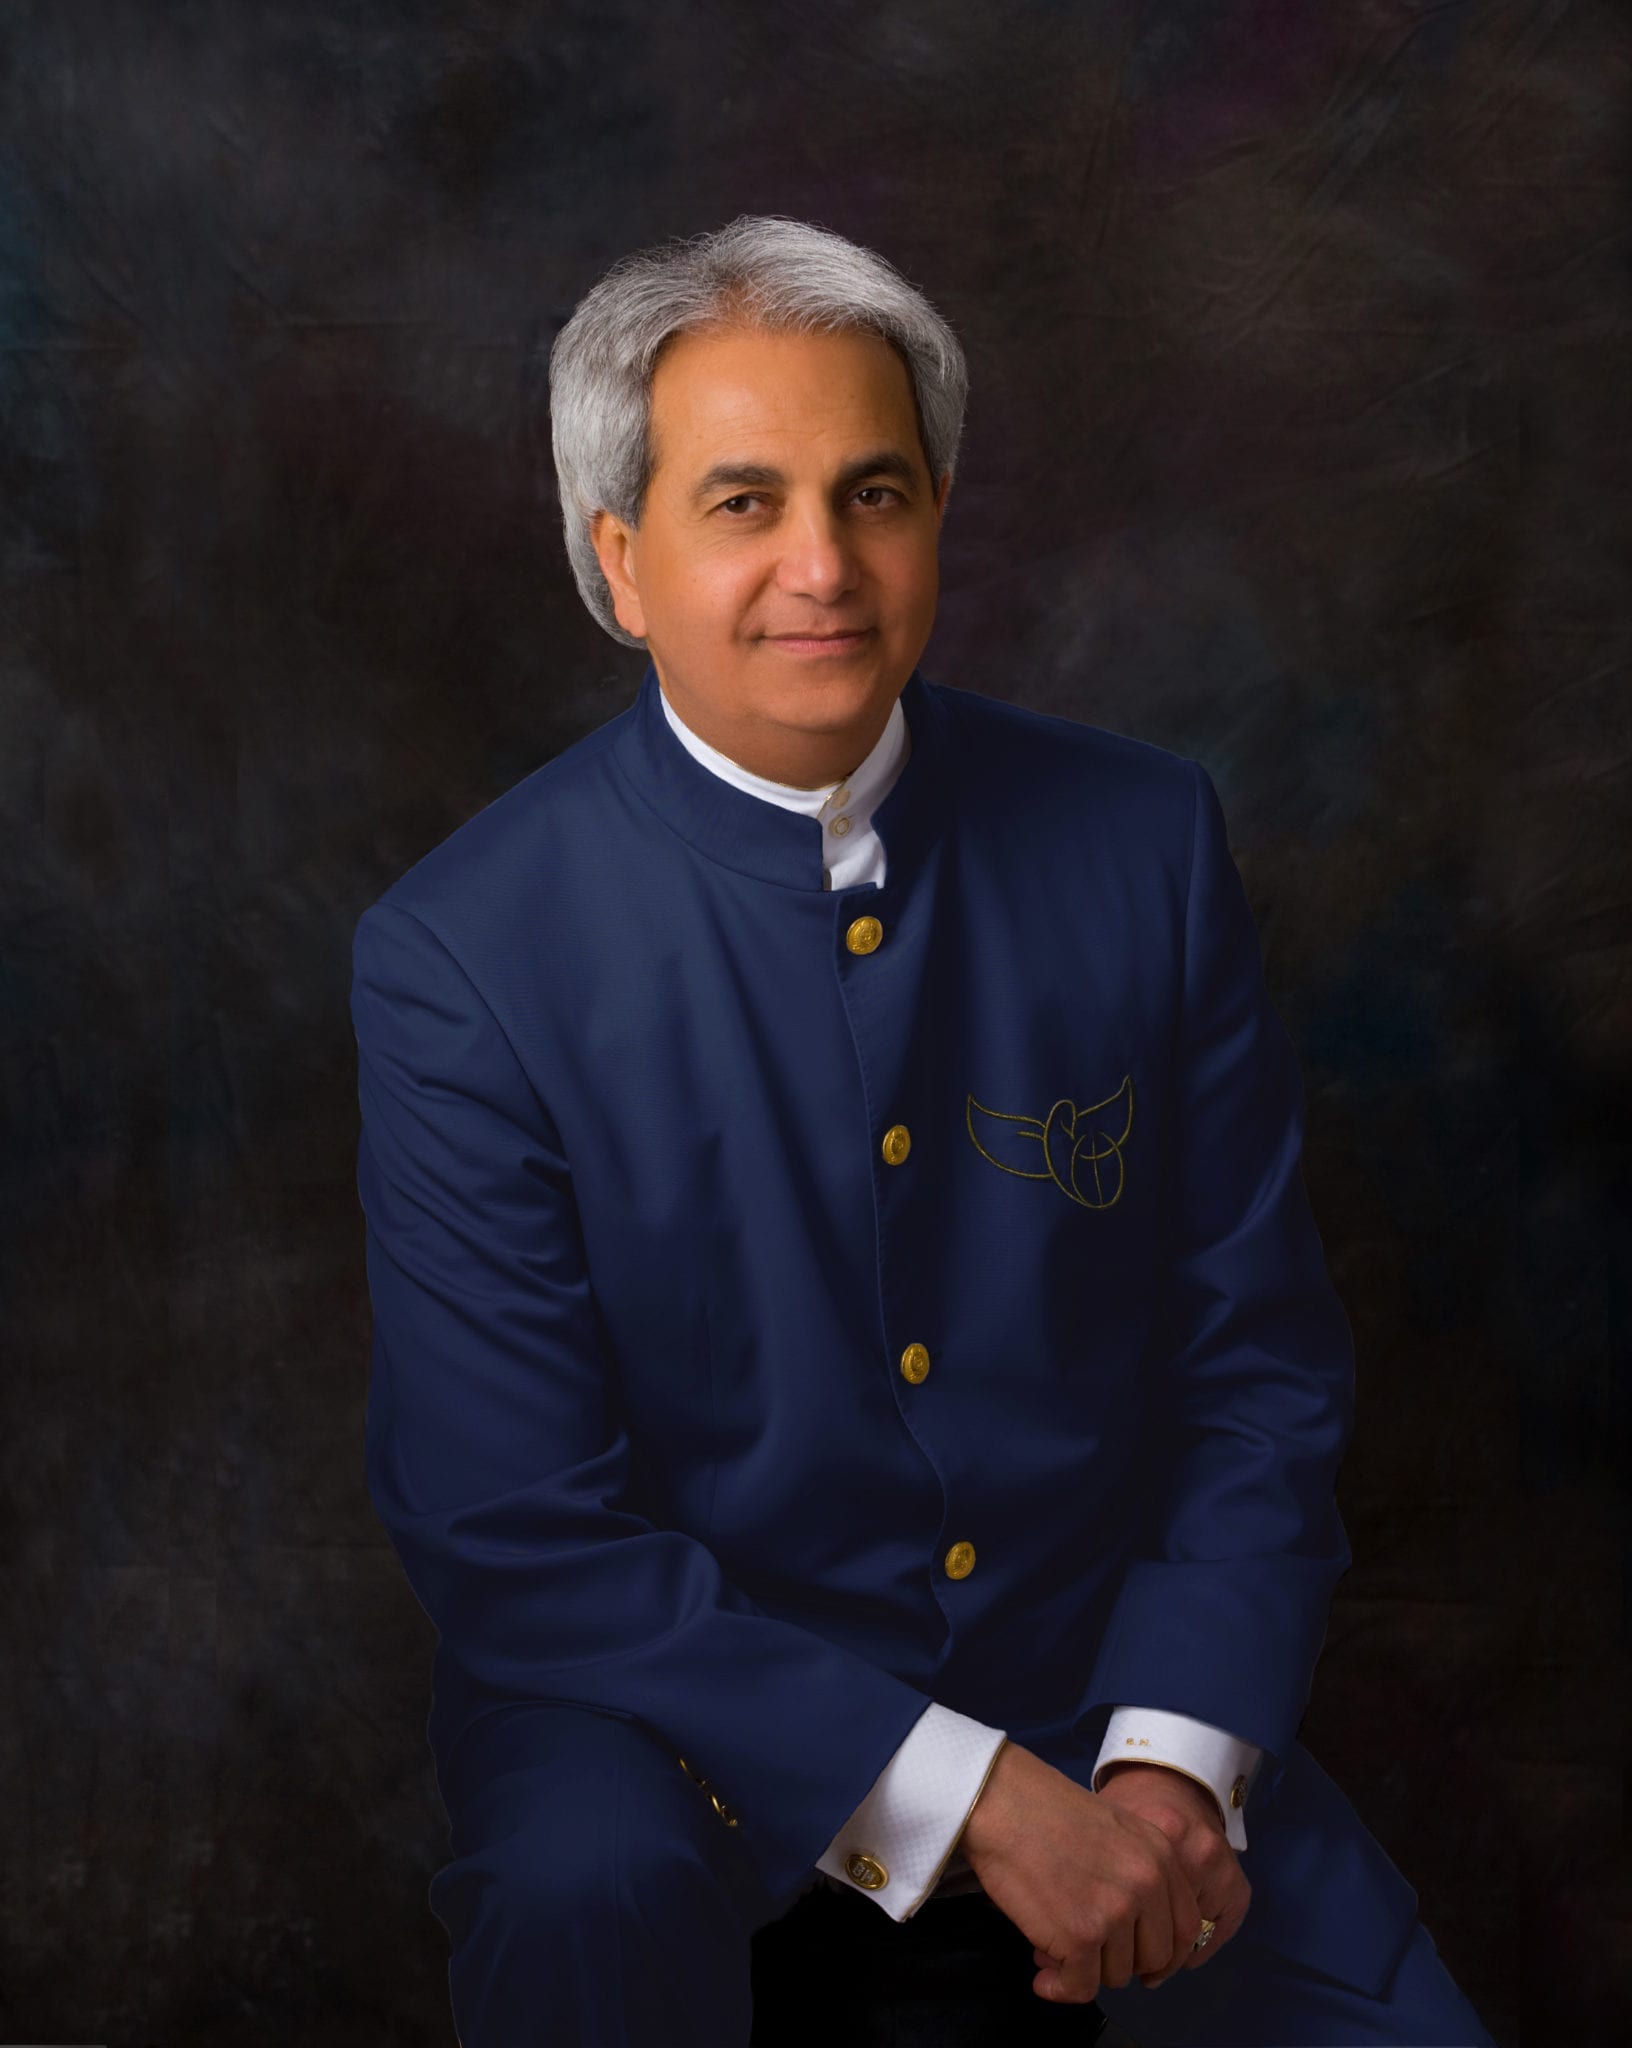 Photos and Information for Media Use - Benny Hinn Ministries